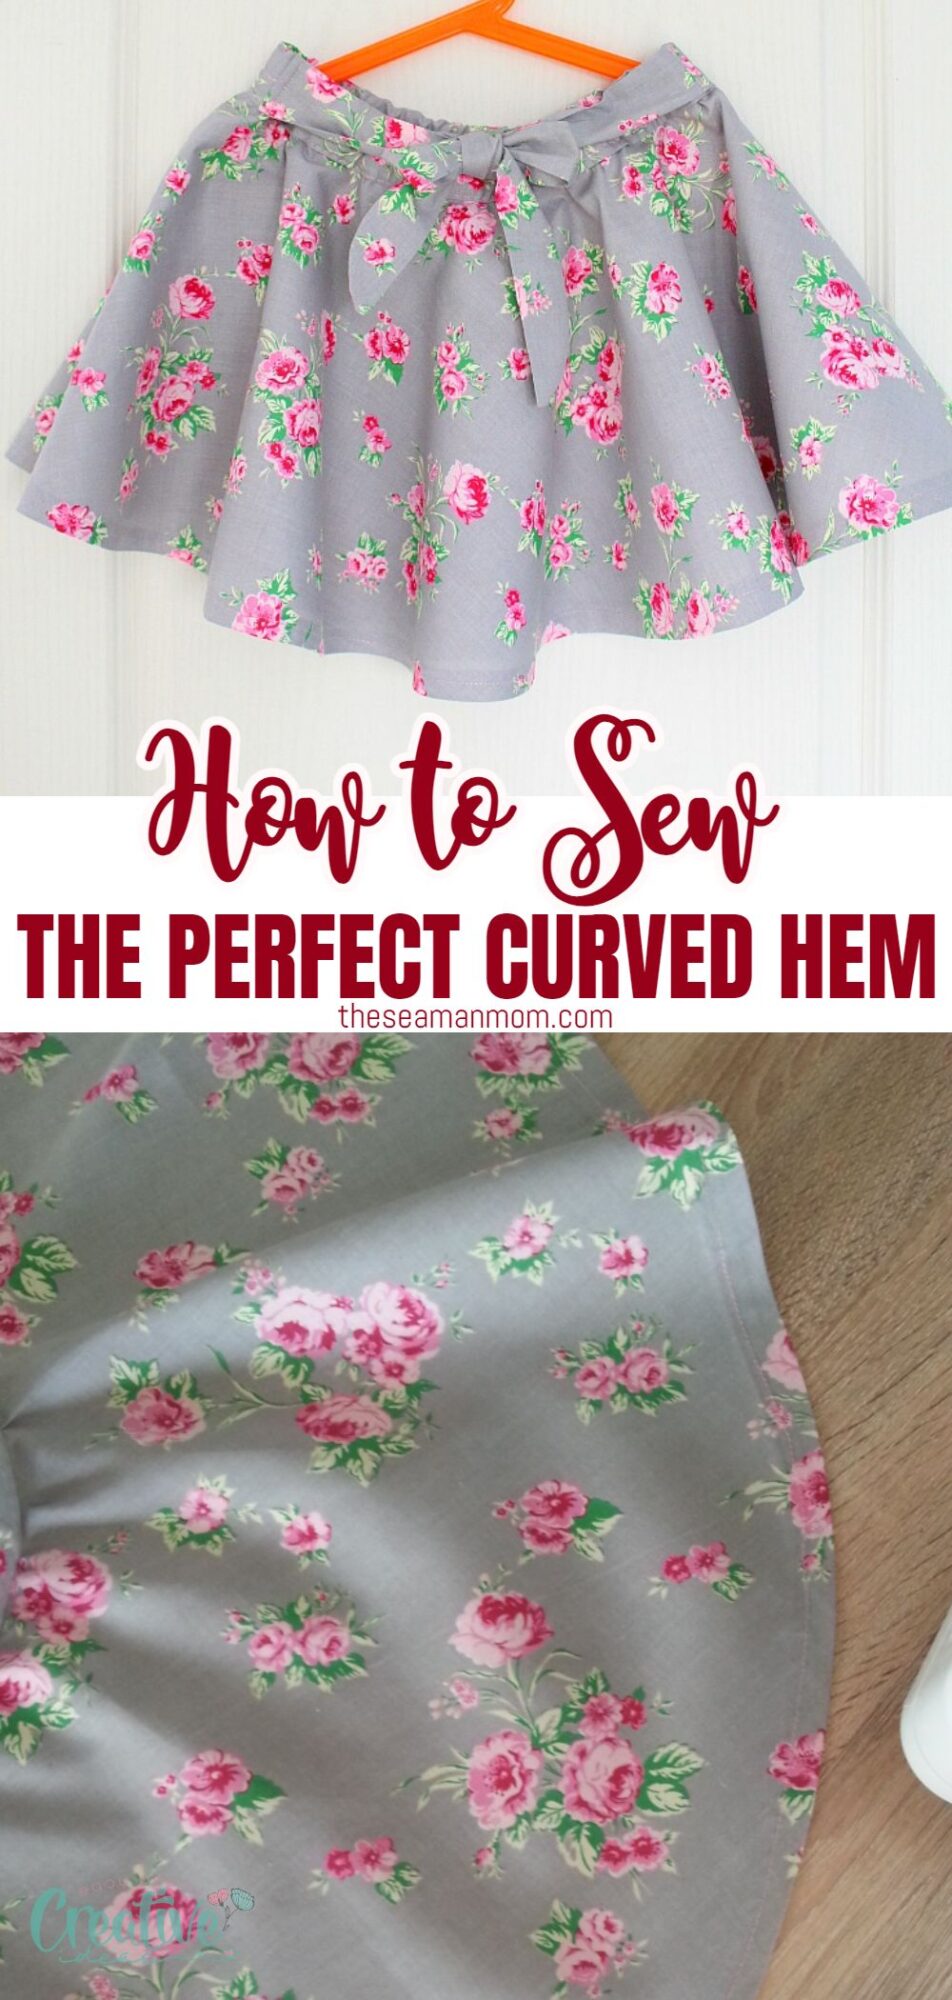 Master the art of sewing curves with ease with this step-by-step guide for sewing a flawless curved hem.